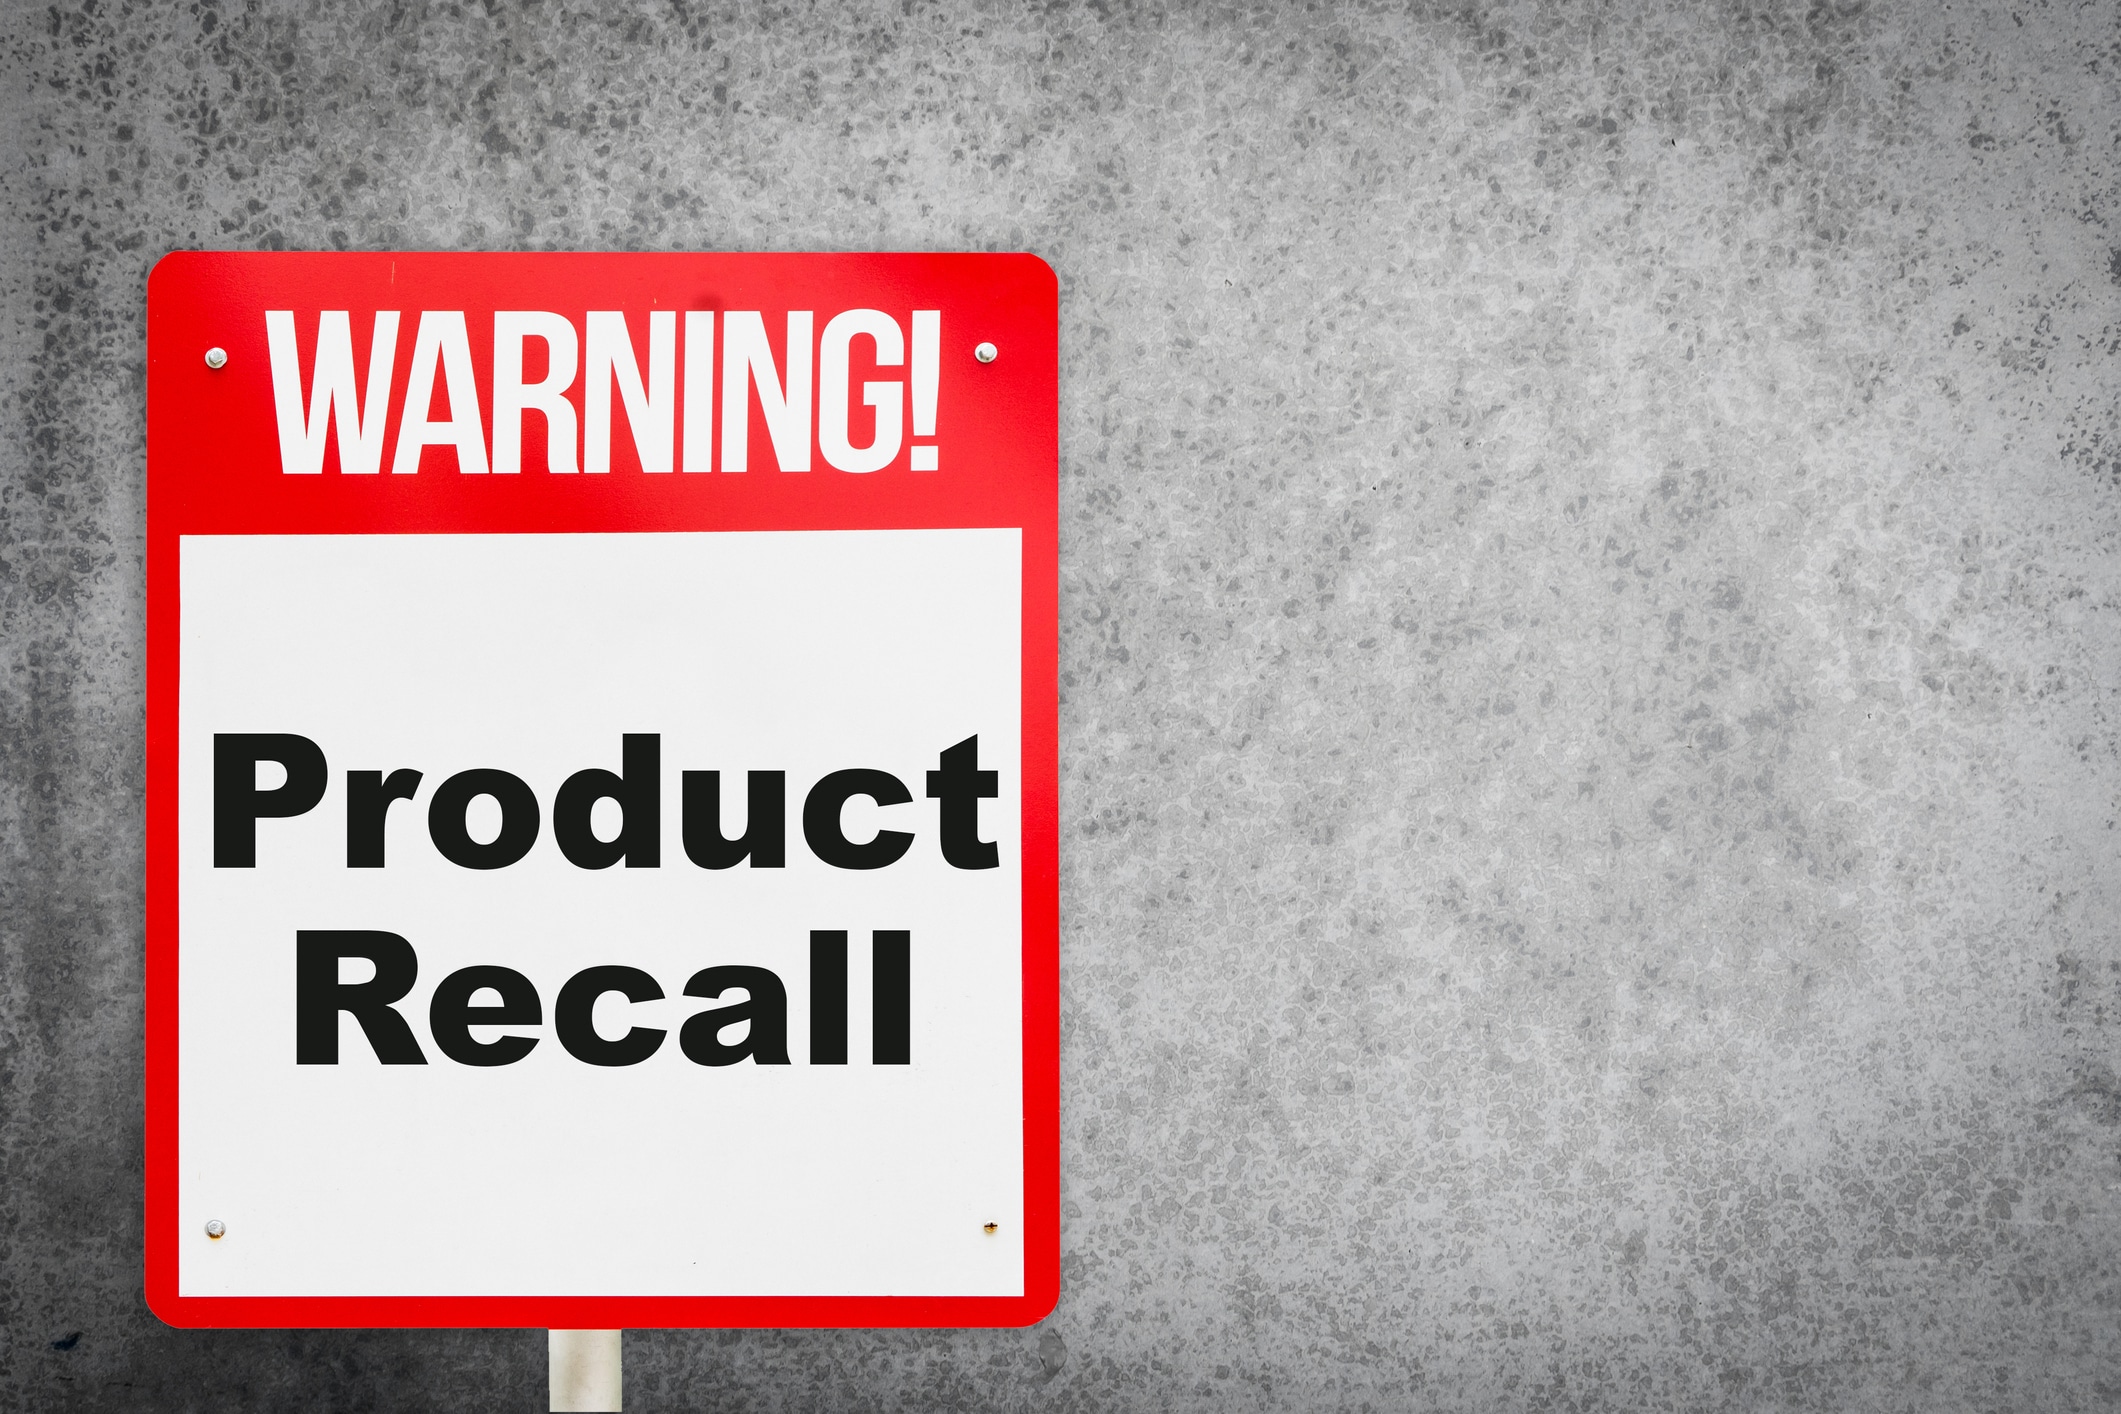 Learn the common FDA recall terms and definitions and how to